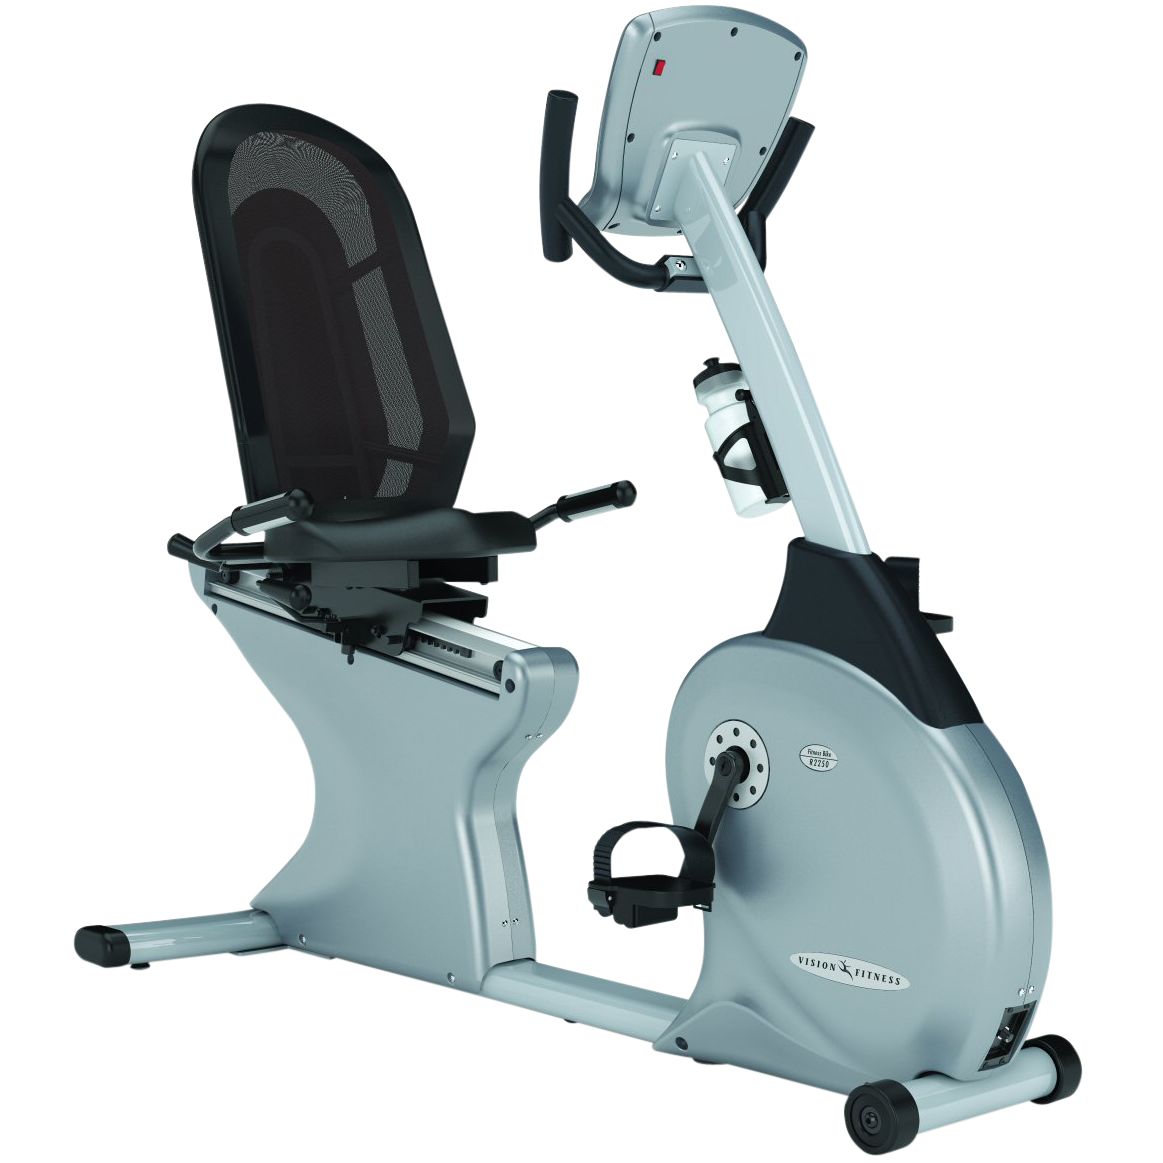 Vision Fitness R2250 Recumbent Exercise Bike with Premier Console at John Lewis